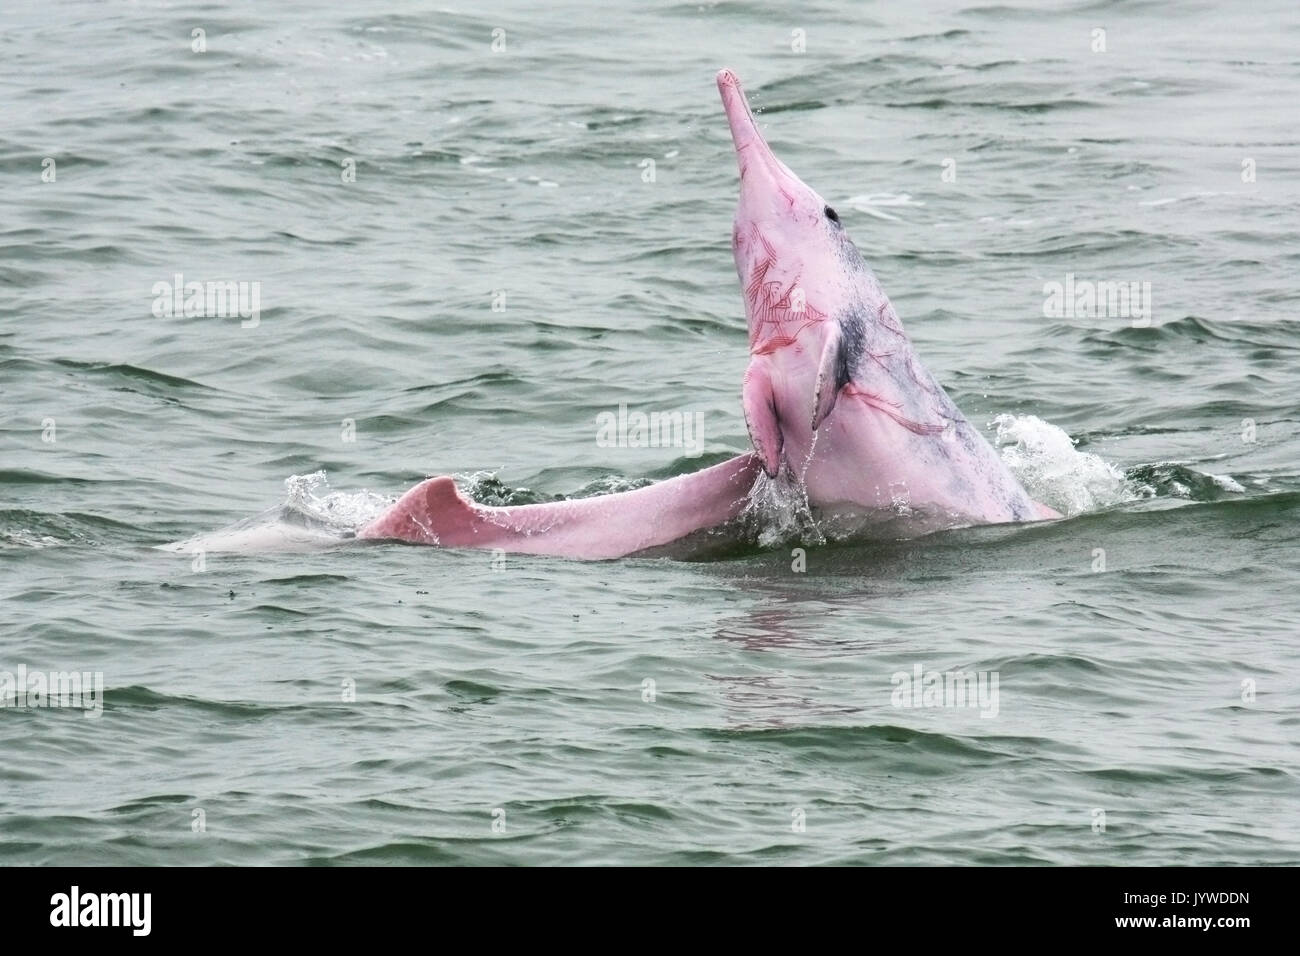 Indo-Pacific Humpback Dolphin (Sousa chinensis) with rake marks, as he has been harassing the mother-and-calf. This is aggressive behavior of dolphins. Stock Photo